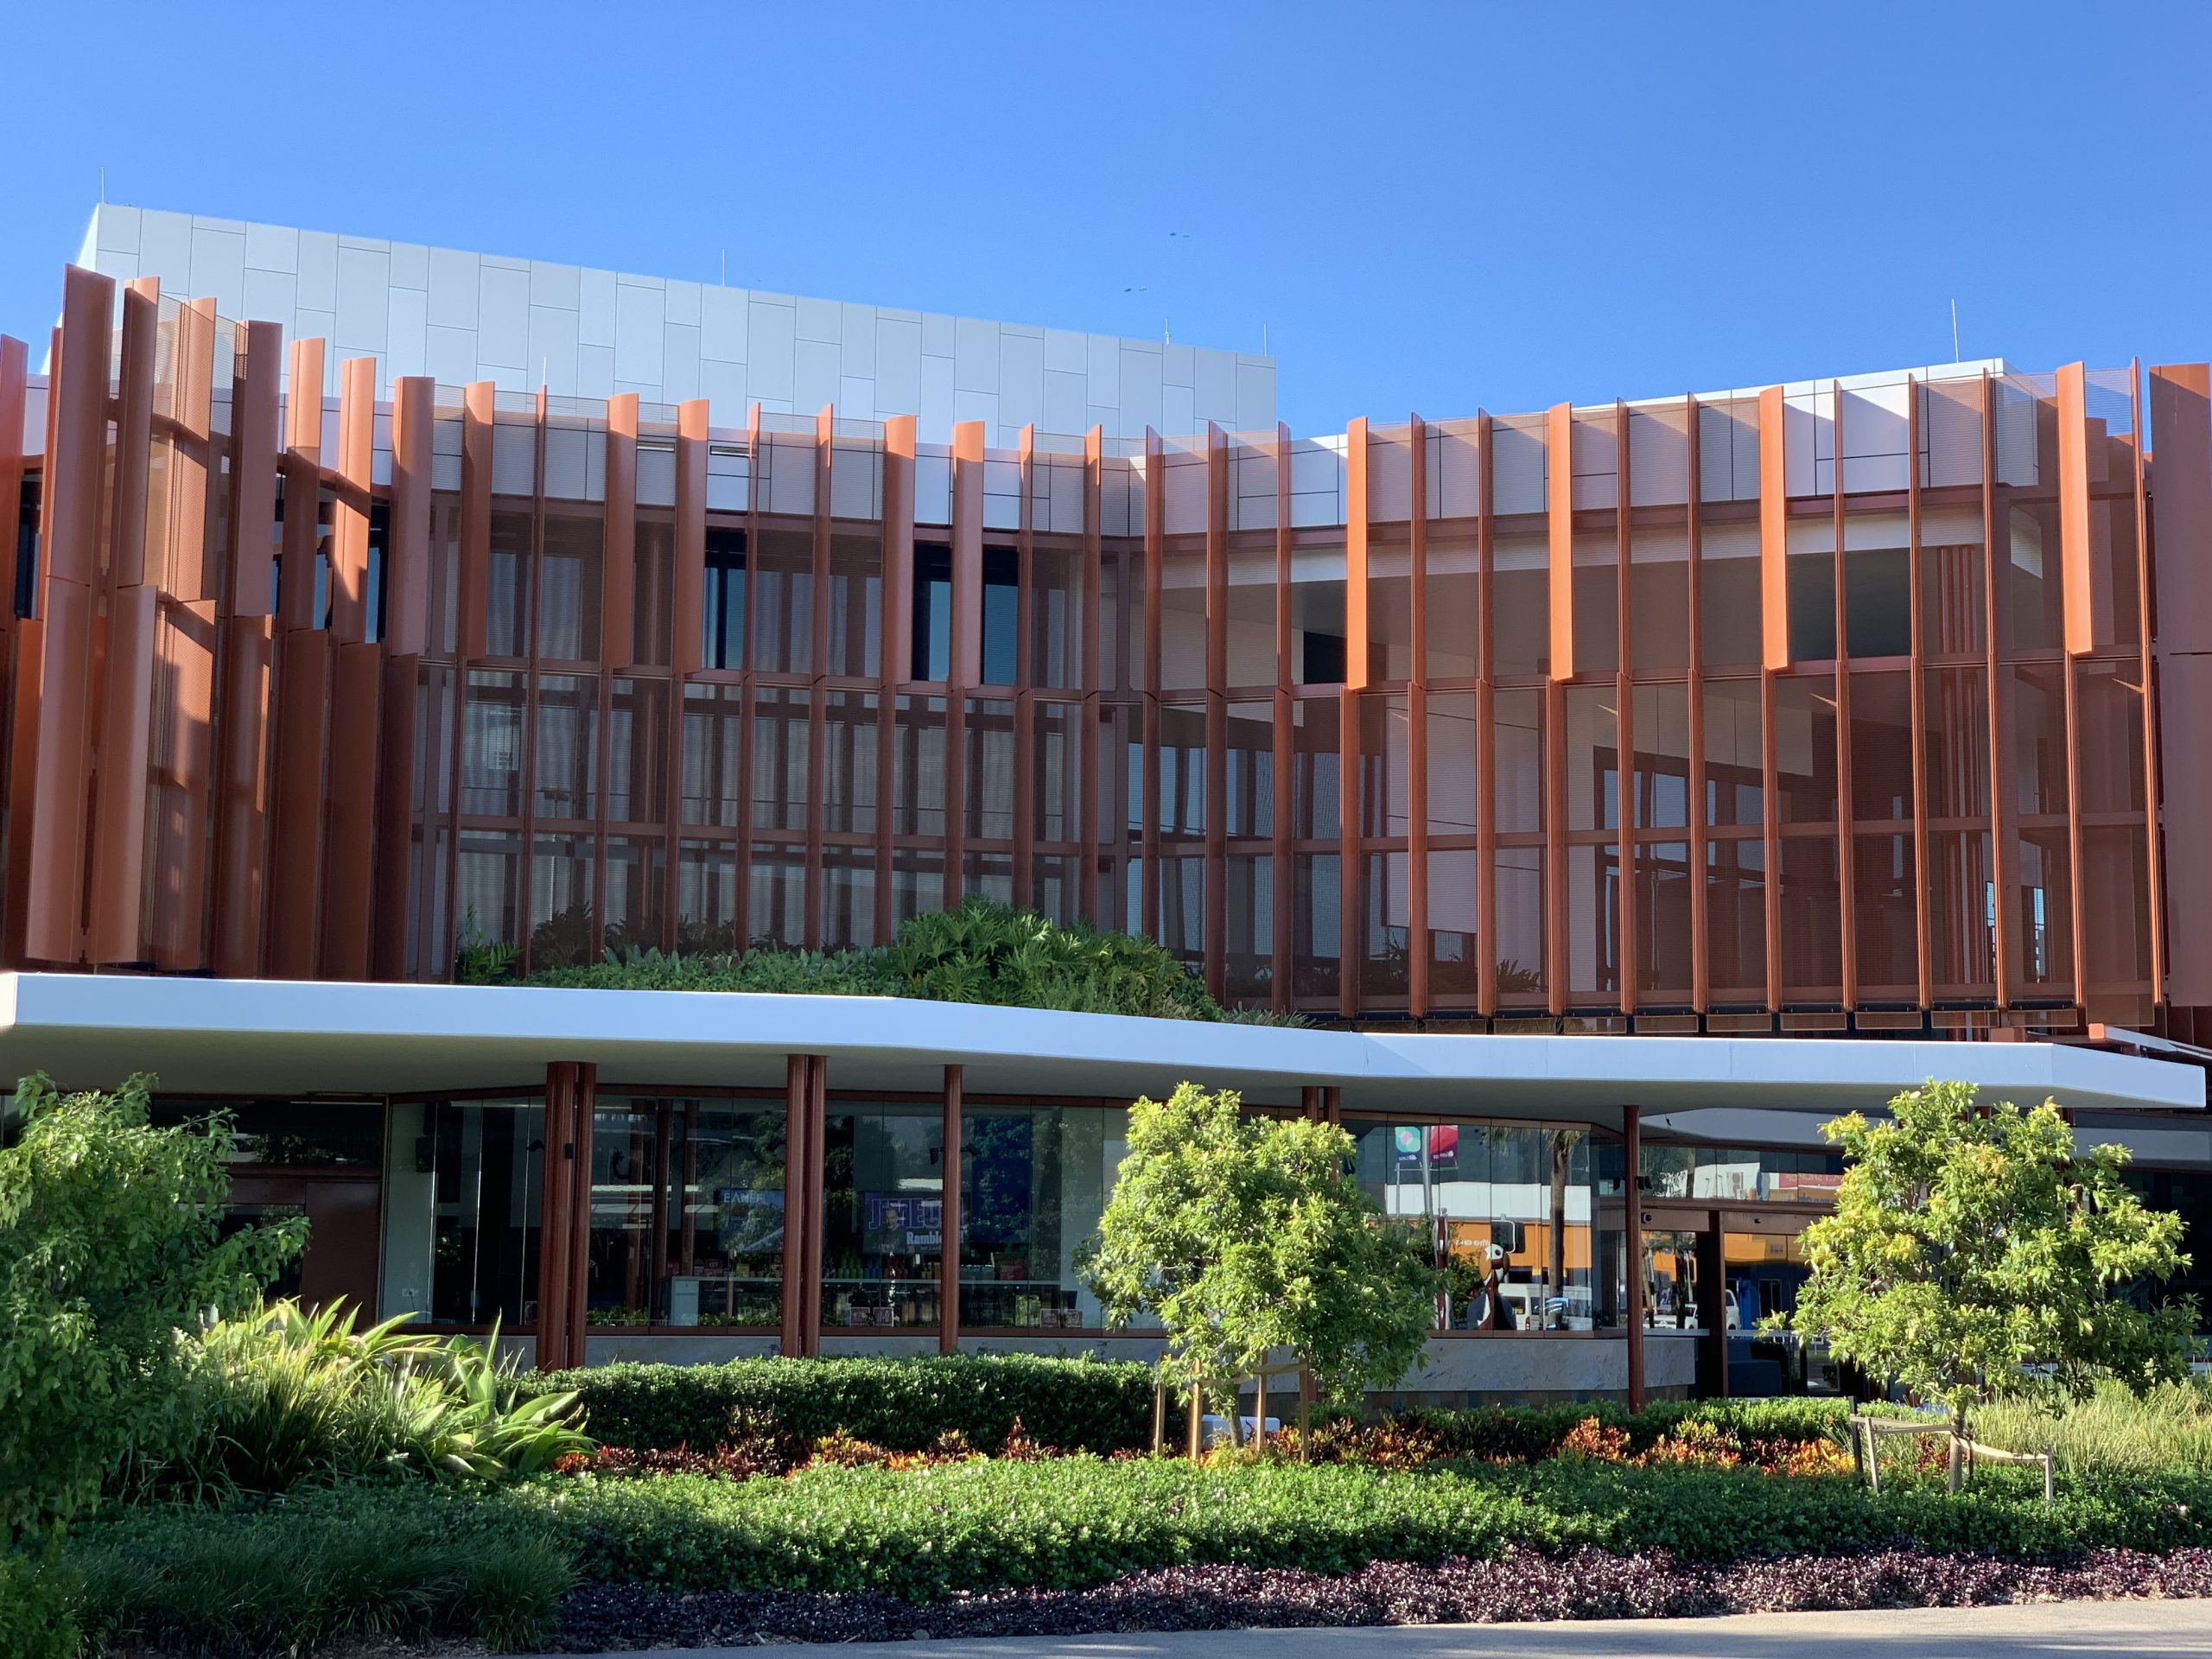 CAIRNS PERFORMING ART CENTRE